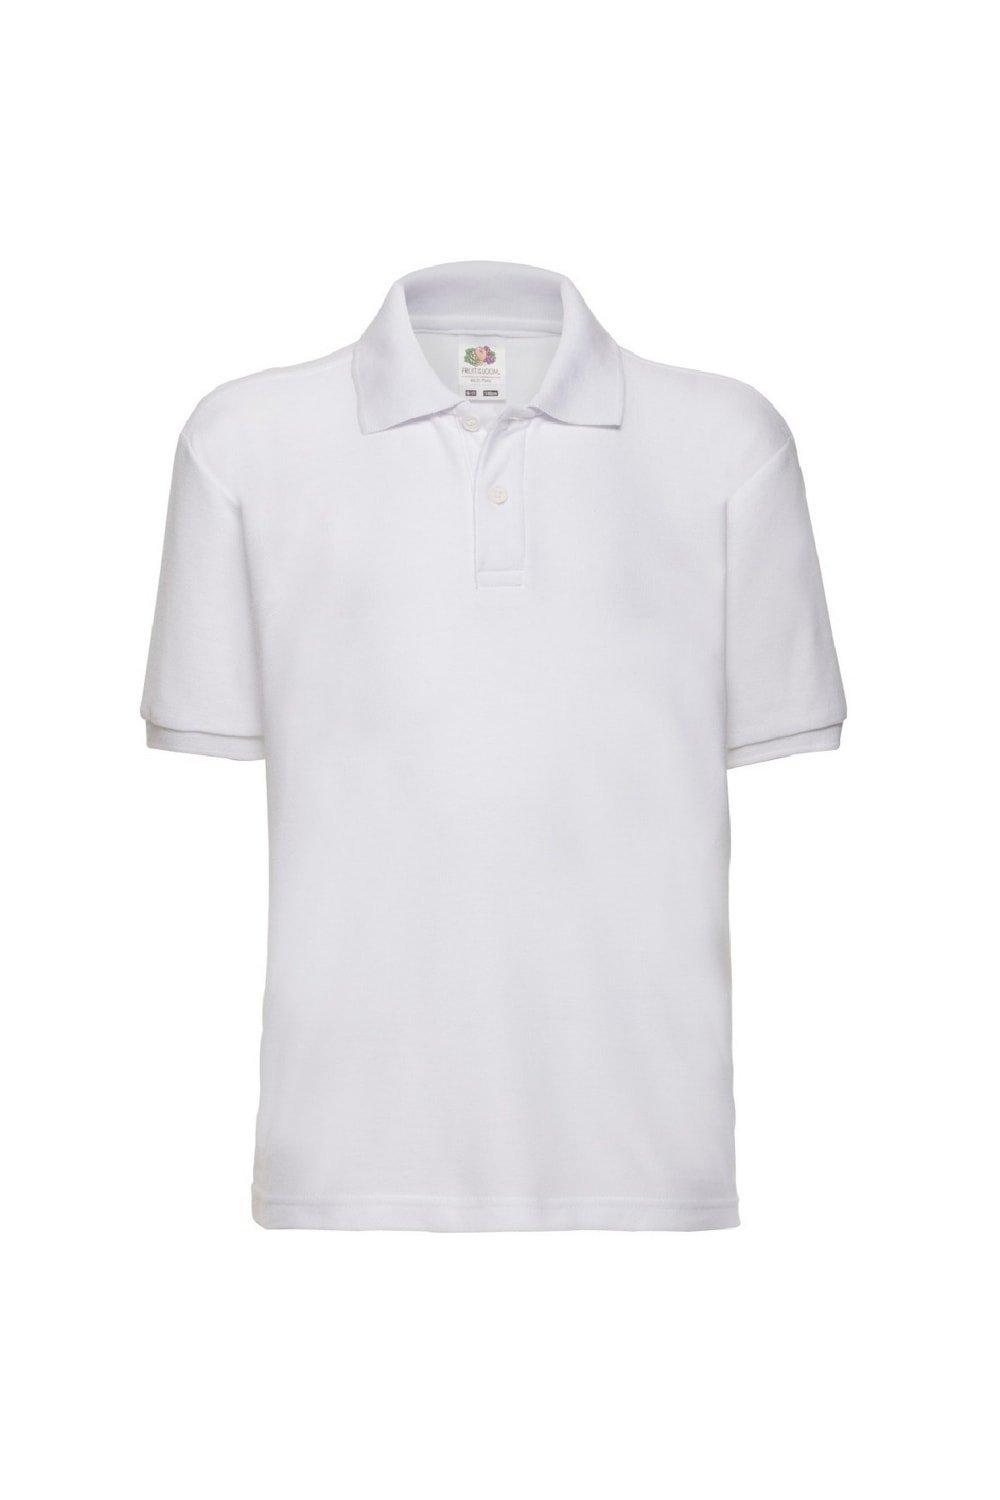 65/35 Pique Polo Shirt (Pack of 2)